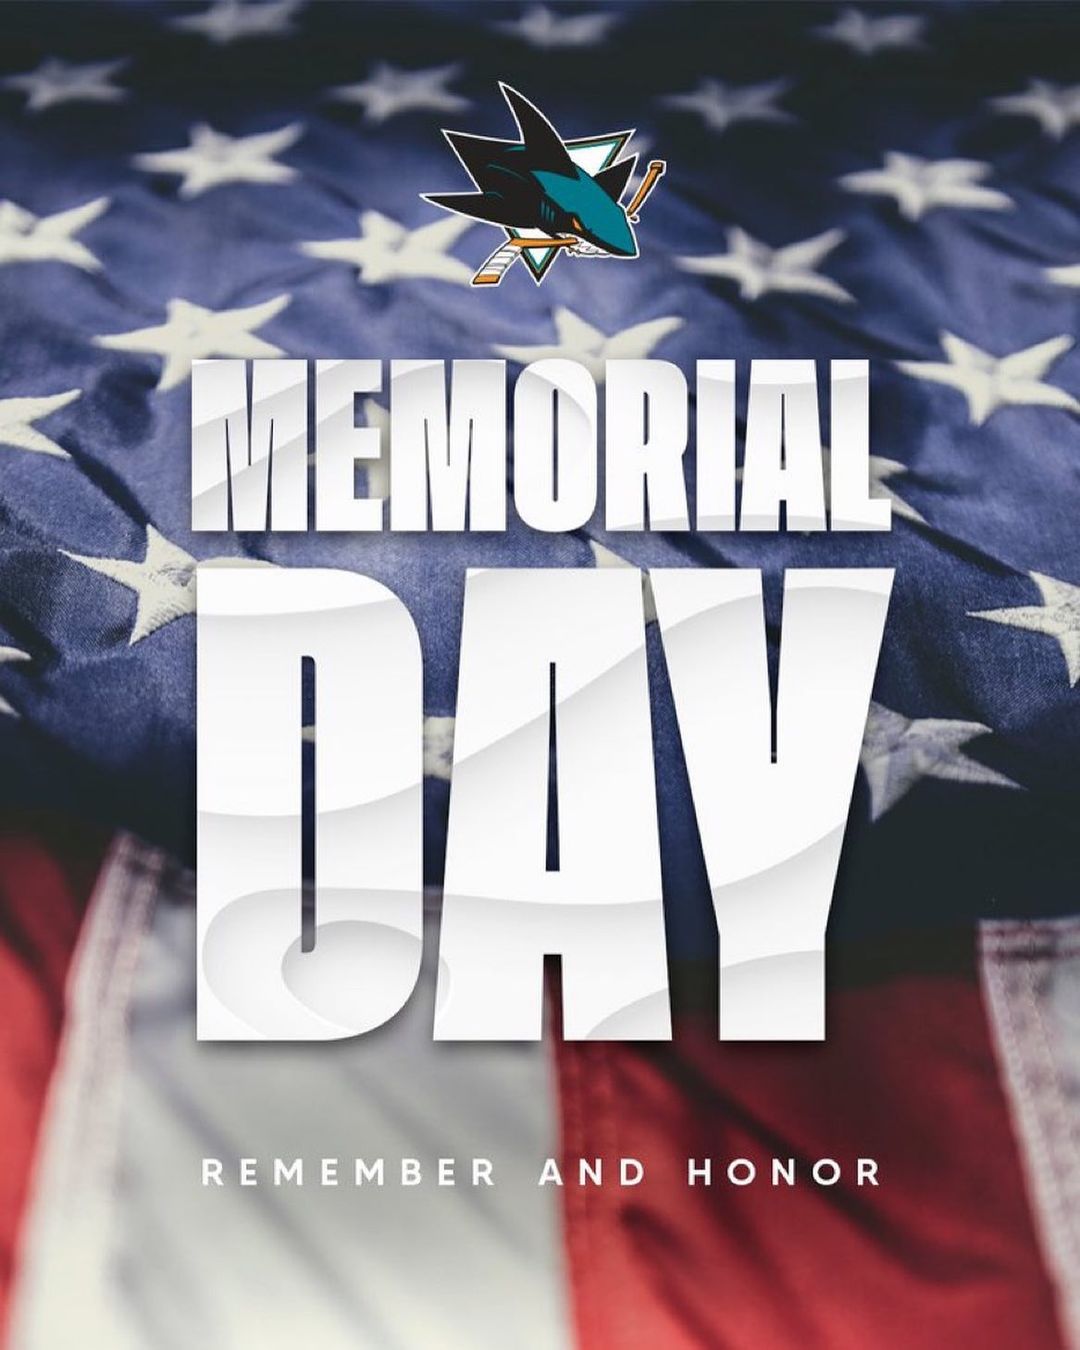 We remember, honor and thank those who made the ultimate sacrifice for our count...